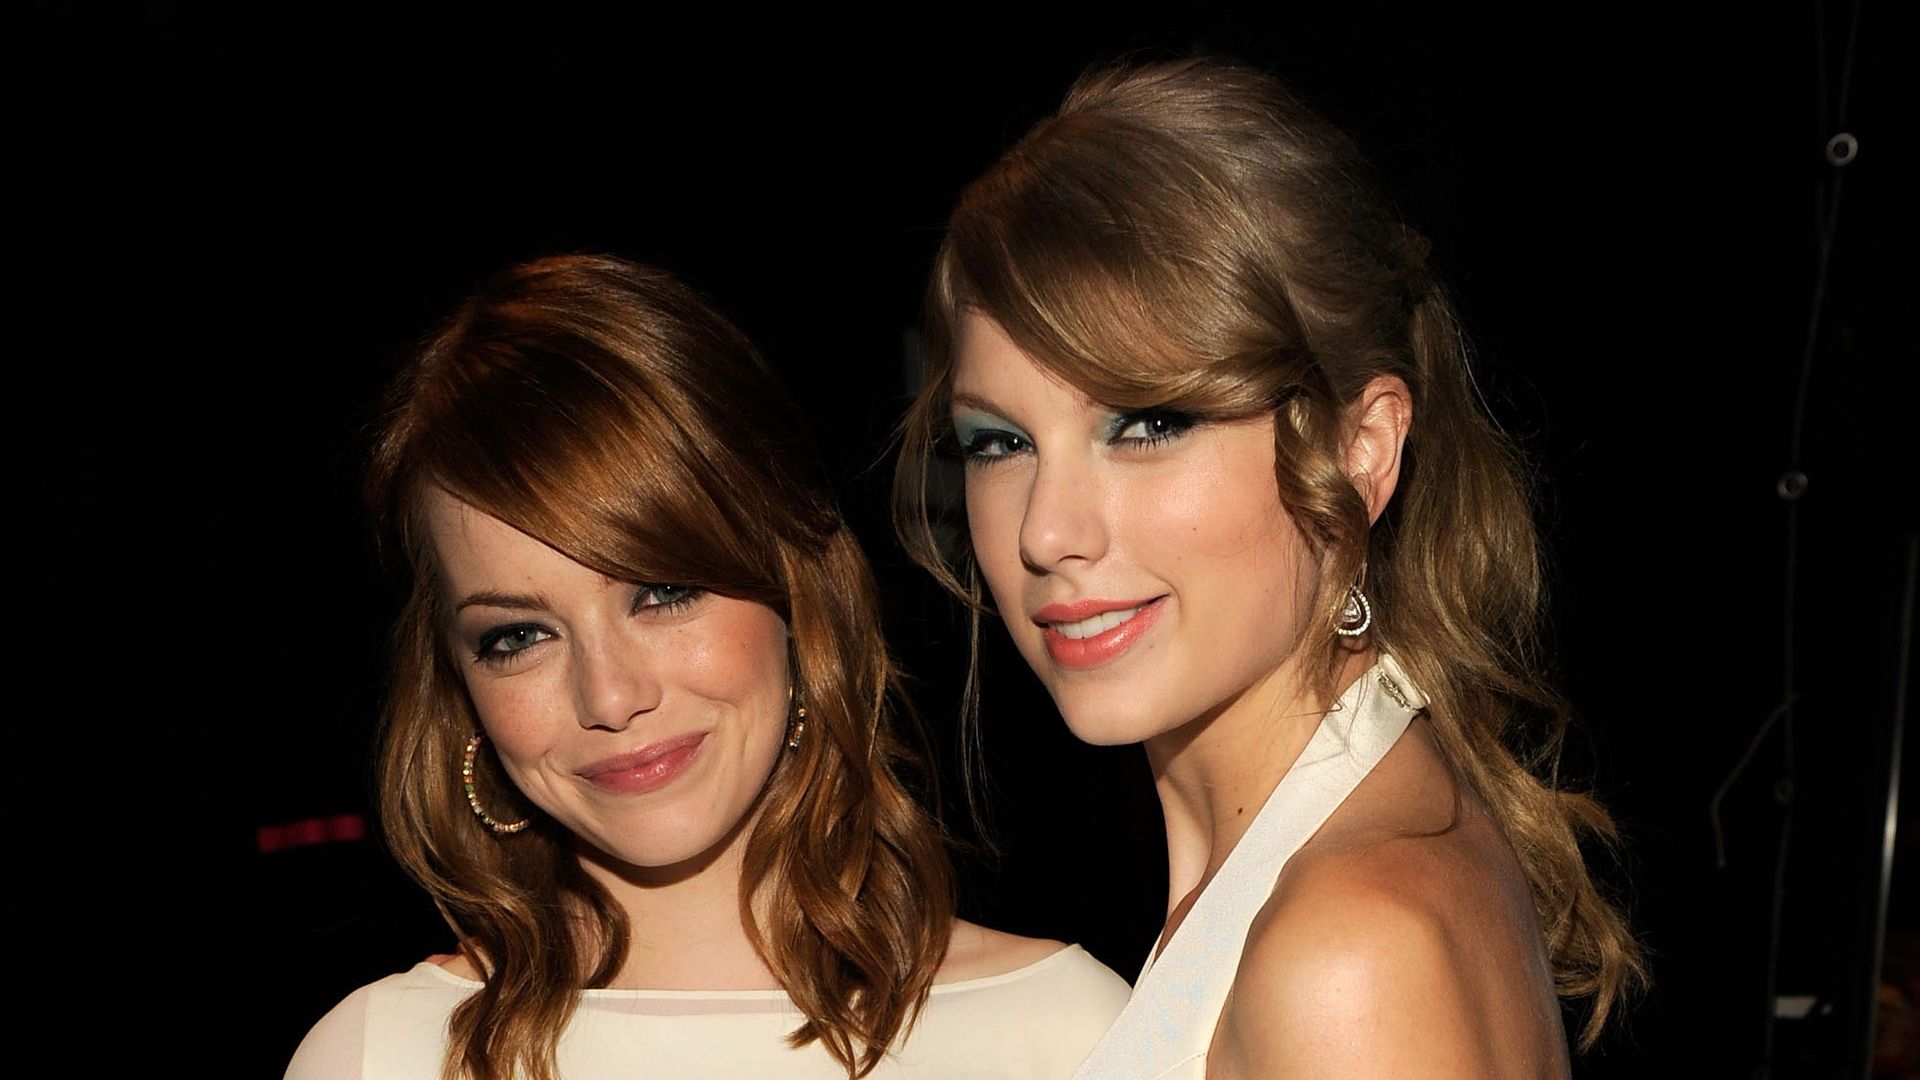 Actress Emma Stone and Singer Taylor Swift attend the 2011 Teen Choice Awards at Gibson Universal Amphitheatre on August 7, 2011 in Universal City, California.